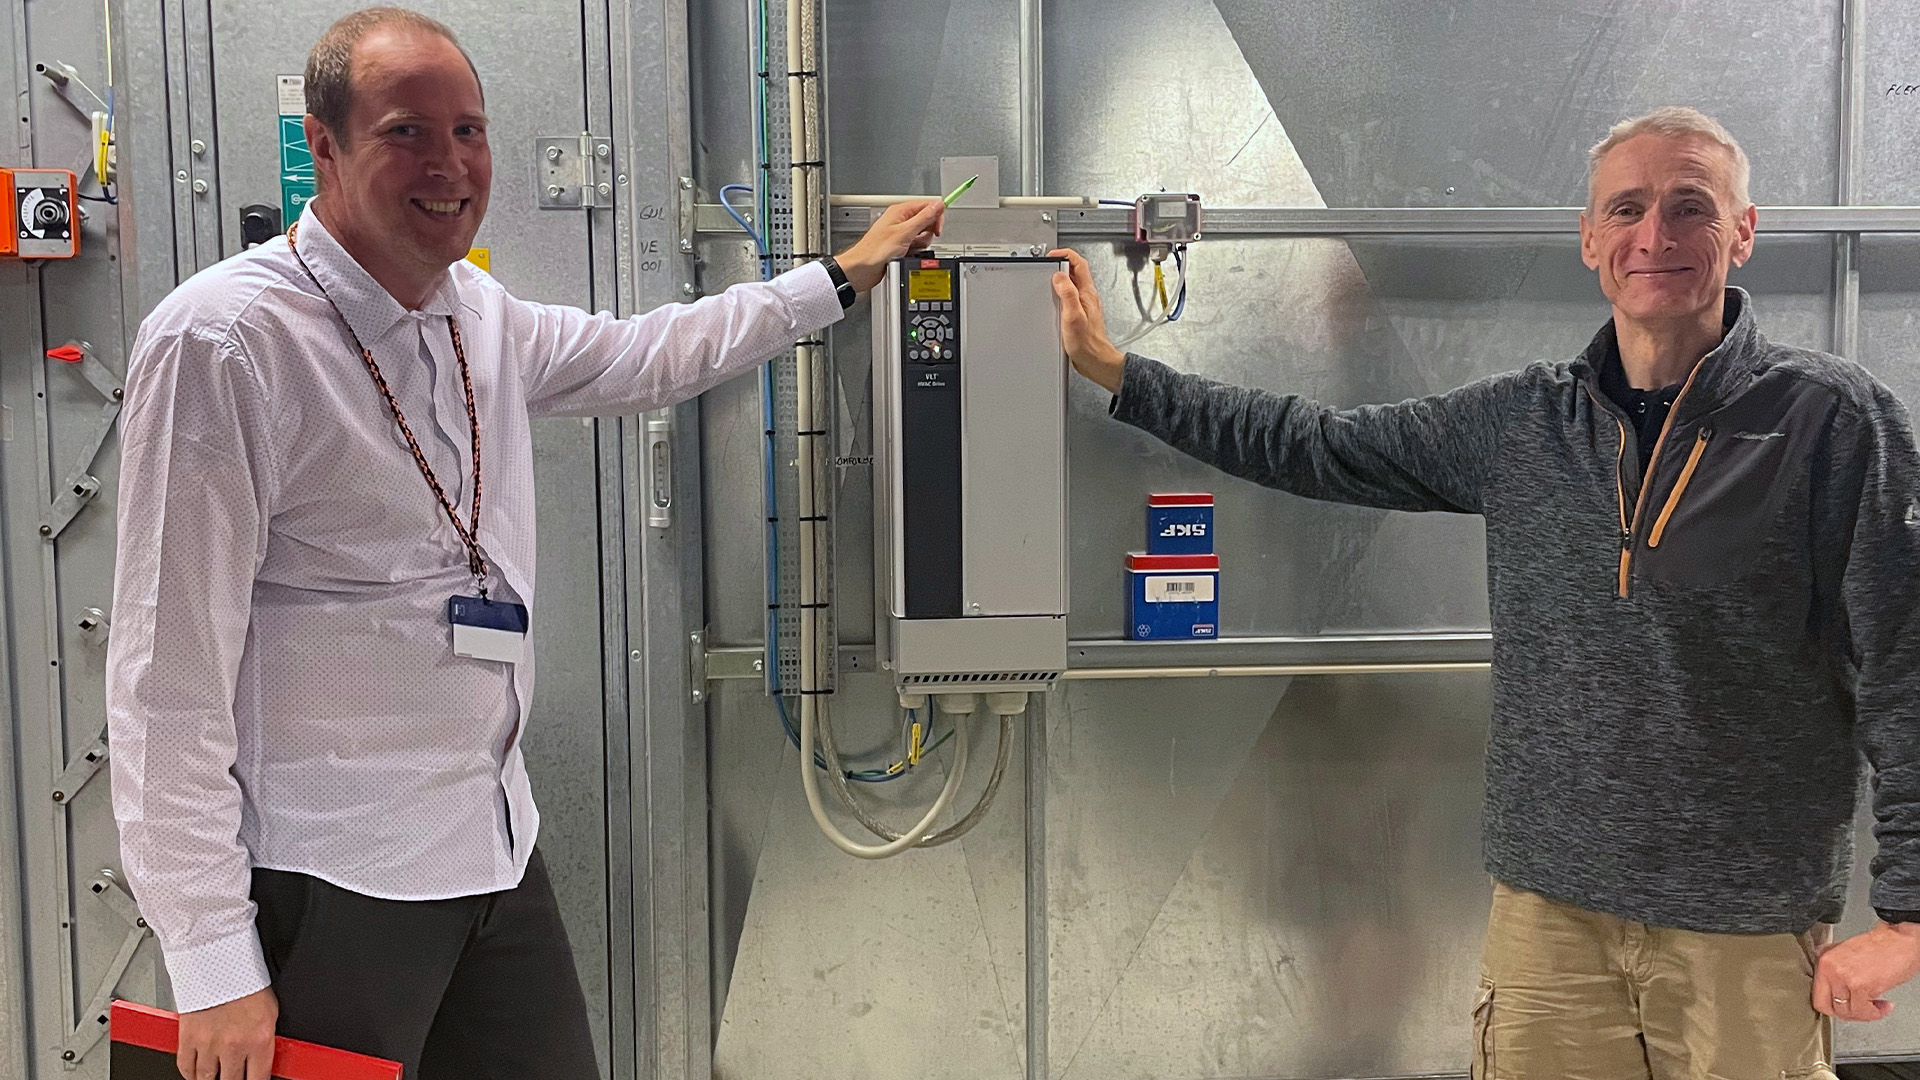 DTU Nanolab's head of operations Leif Steen Johansen (right) and facility manager Jan Vasland Eriksen are working to cut 10 percent of energy consumption by optimizing the ventilation system in the cleanroom, where micro- and nanoelectronics are produced.